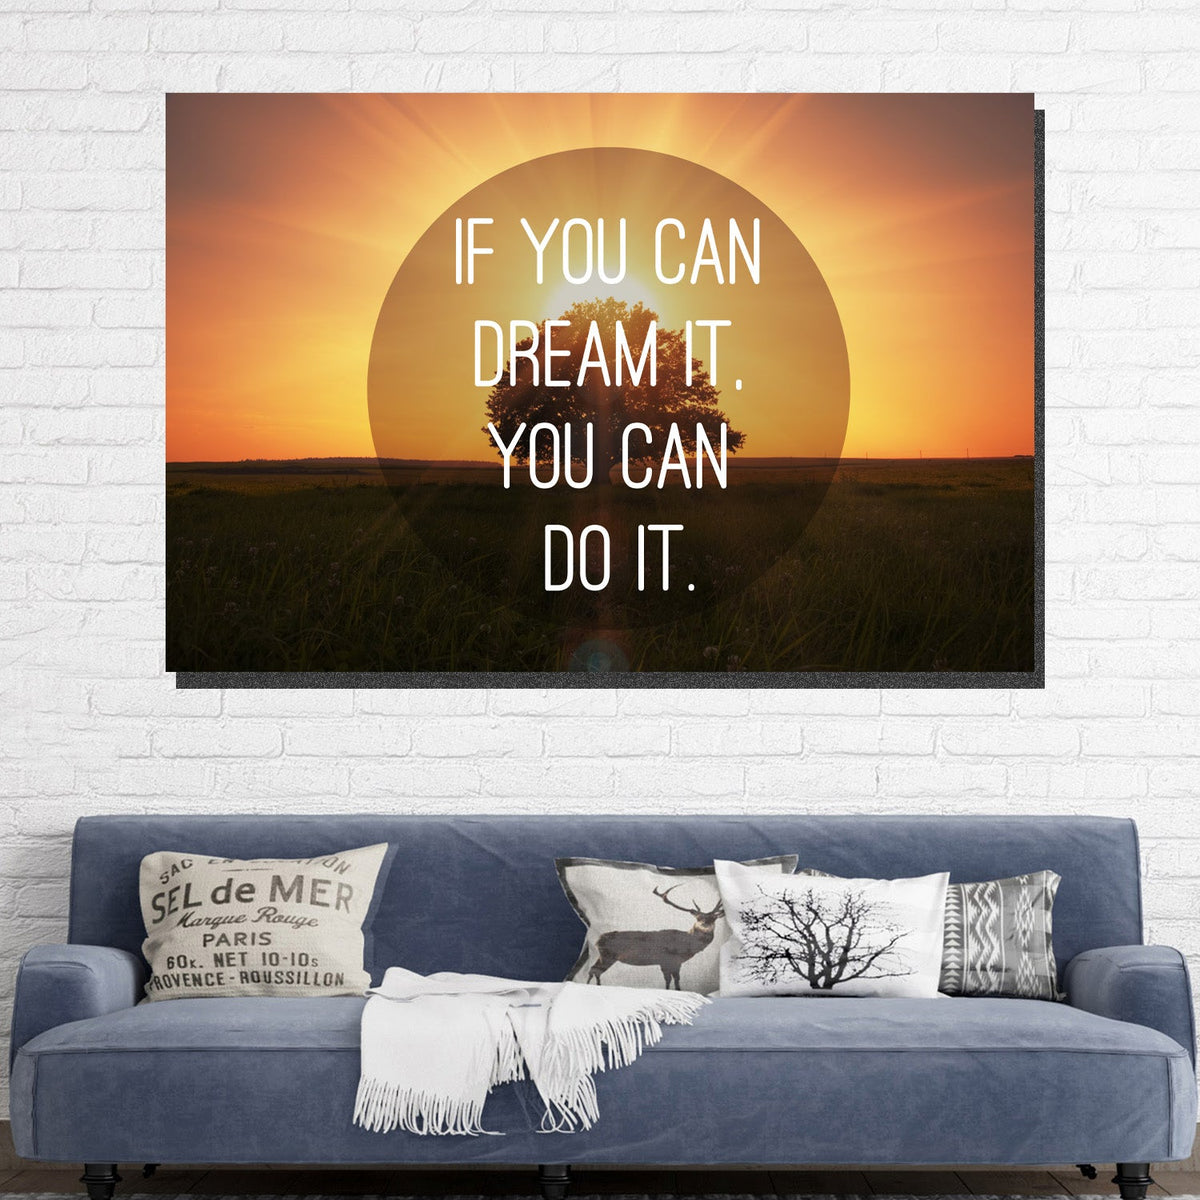 https://cdn.shopify.com/s/files/1/0387/9986/8044/products/DreamCanvasArtprintStretched-1.jpg